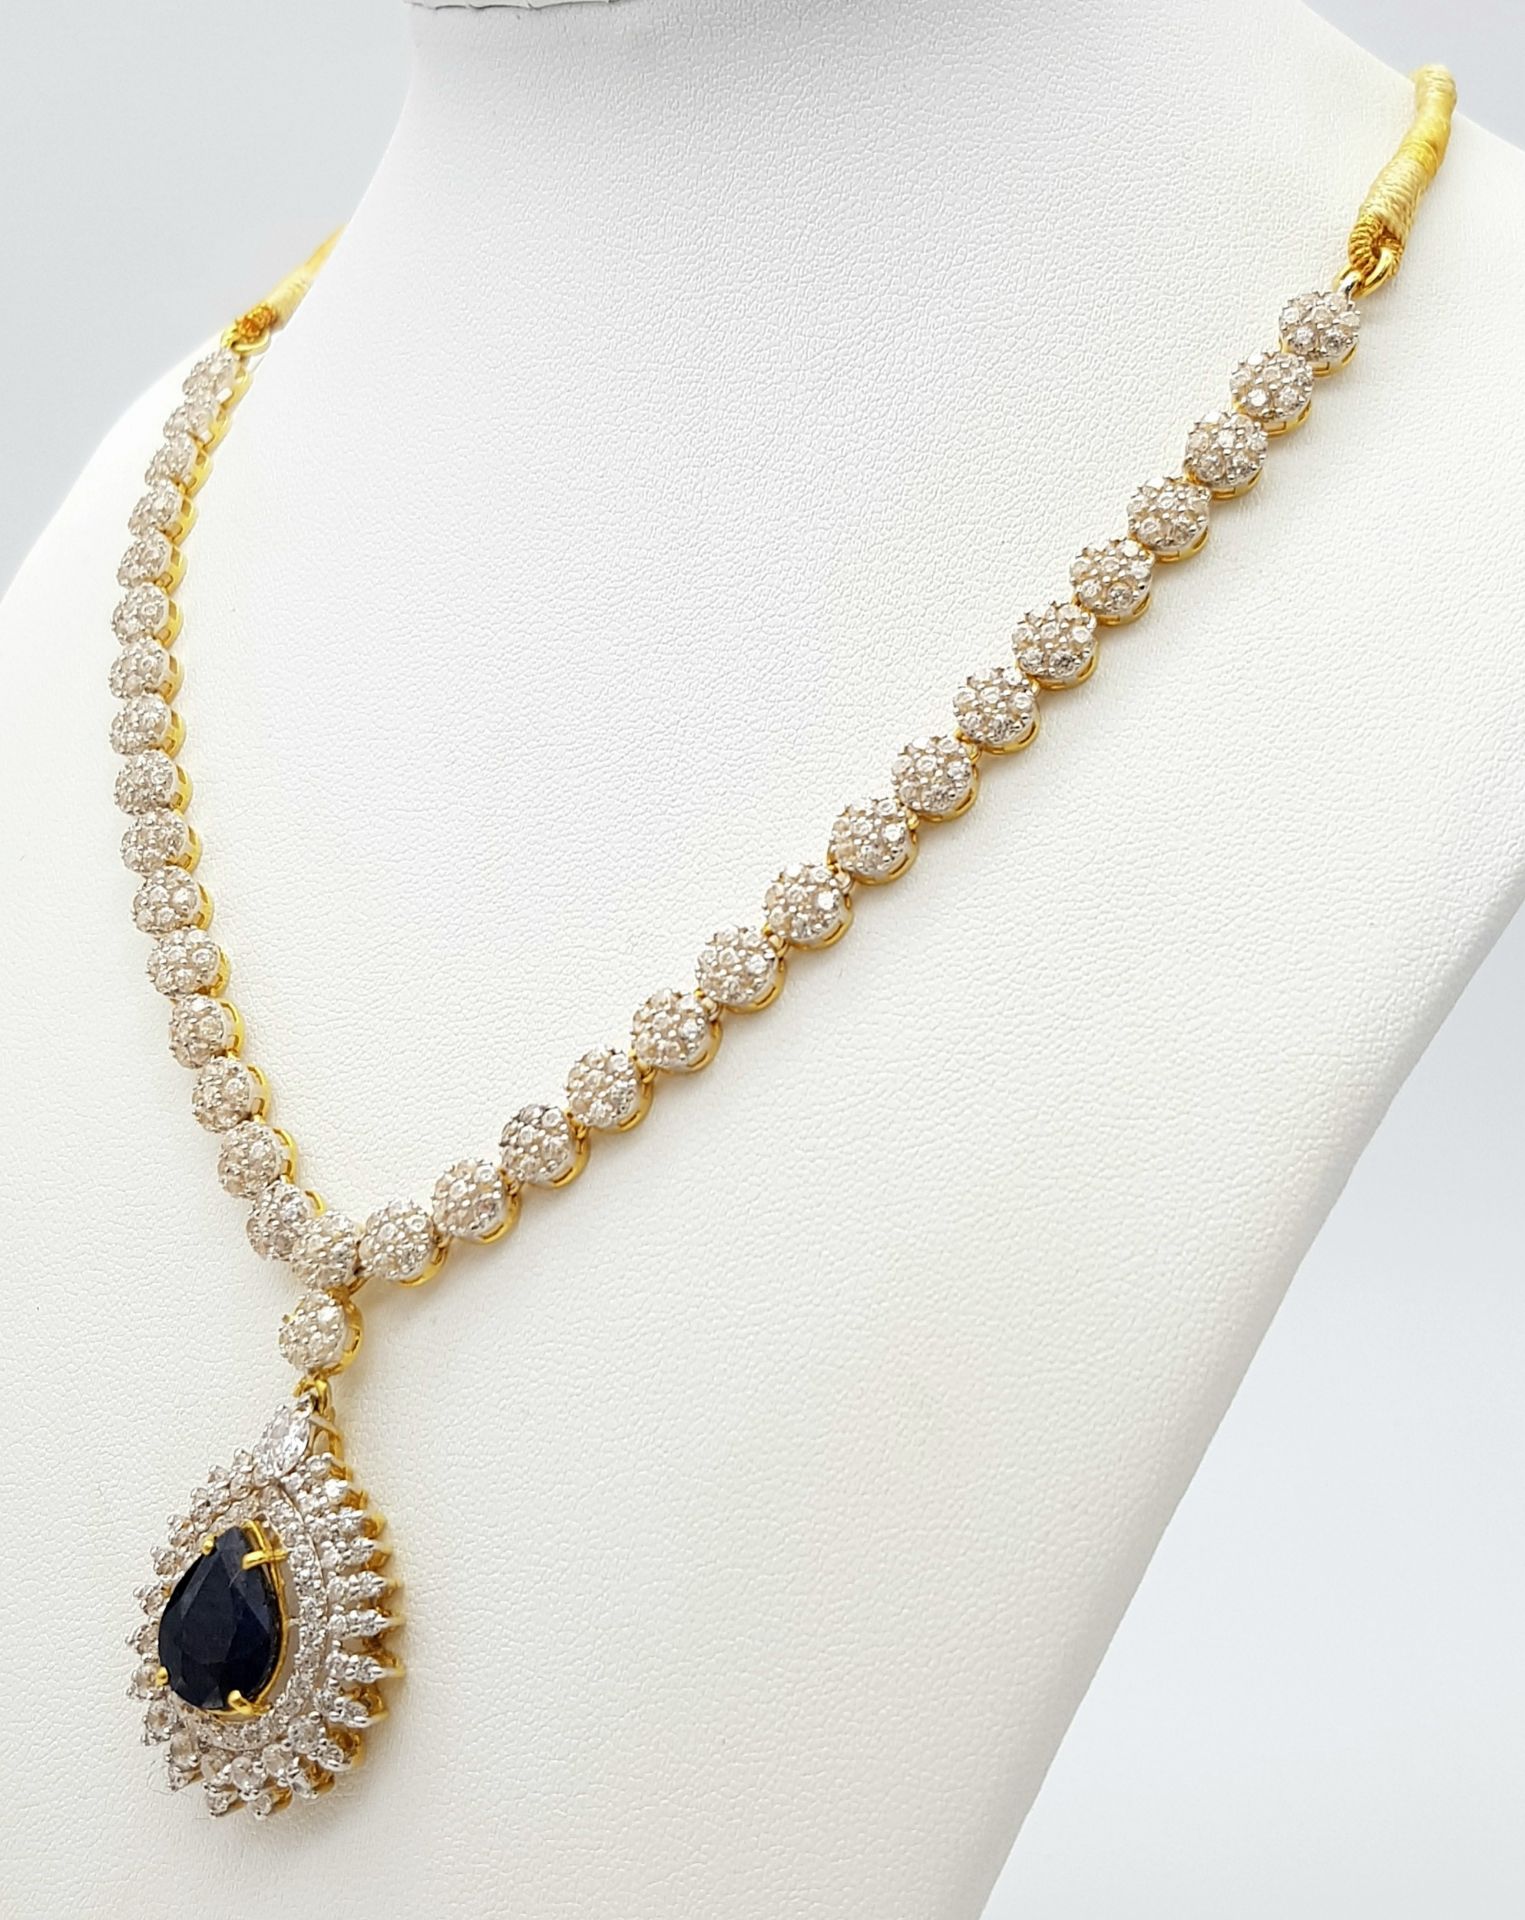 A Fabulous Jewellery Lot! A 21K Rich Yellow Gold Diamond and White Stone (one missing) Necklace with - Image 6 of 7